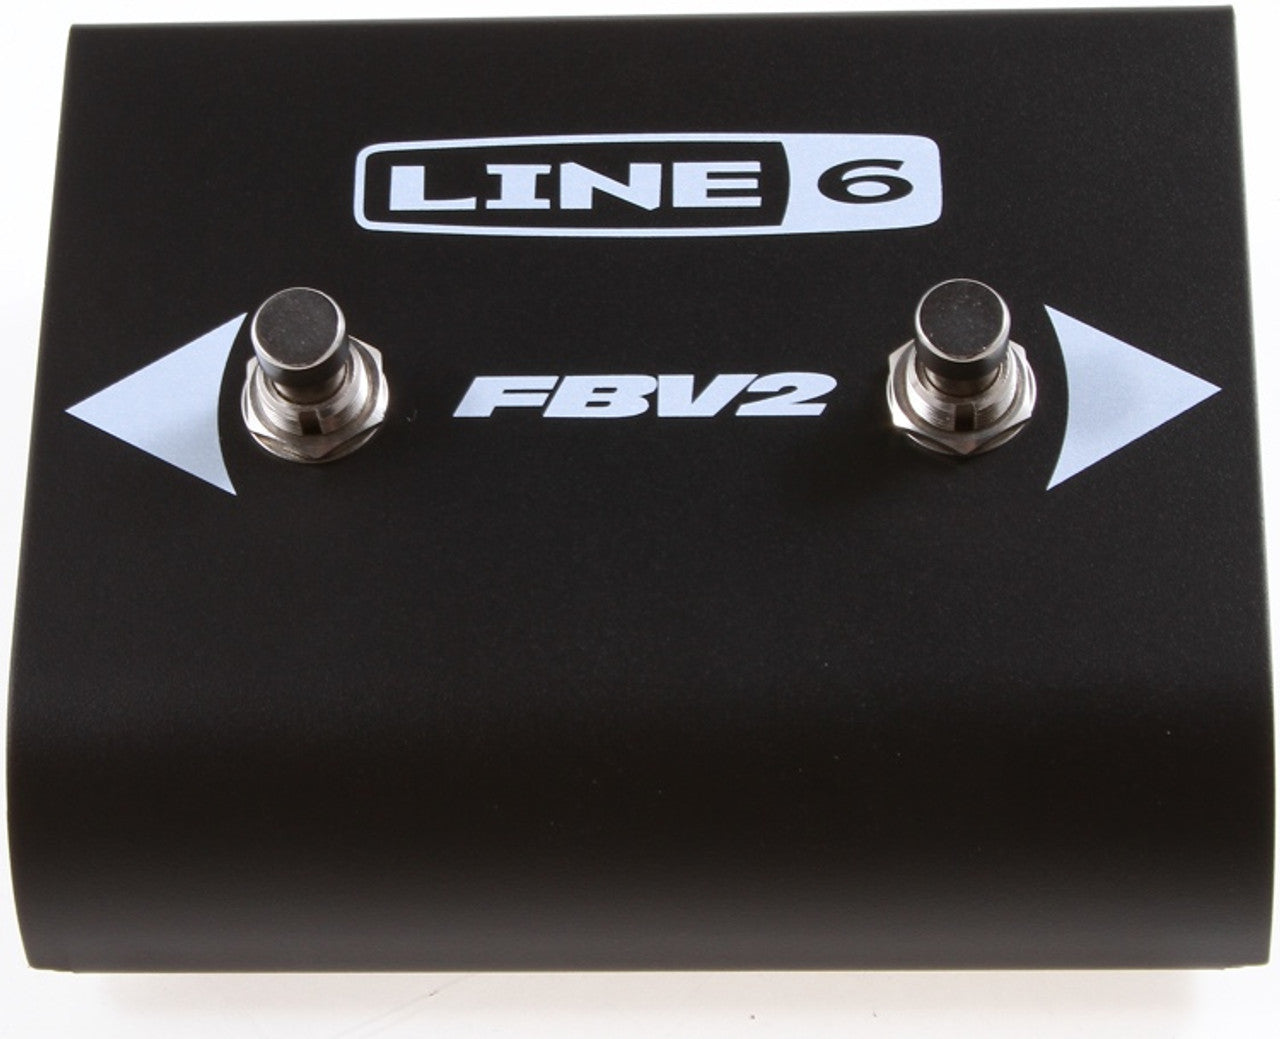 Line 6 FBV2 2-Button Footswitch - ZOSO MUSIC